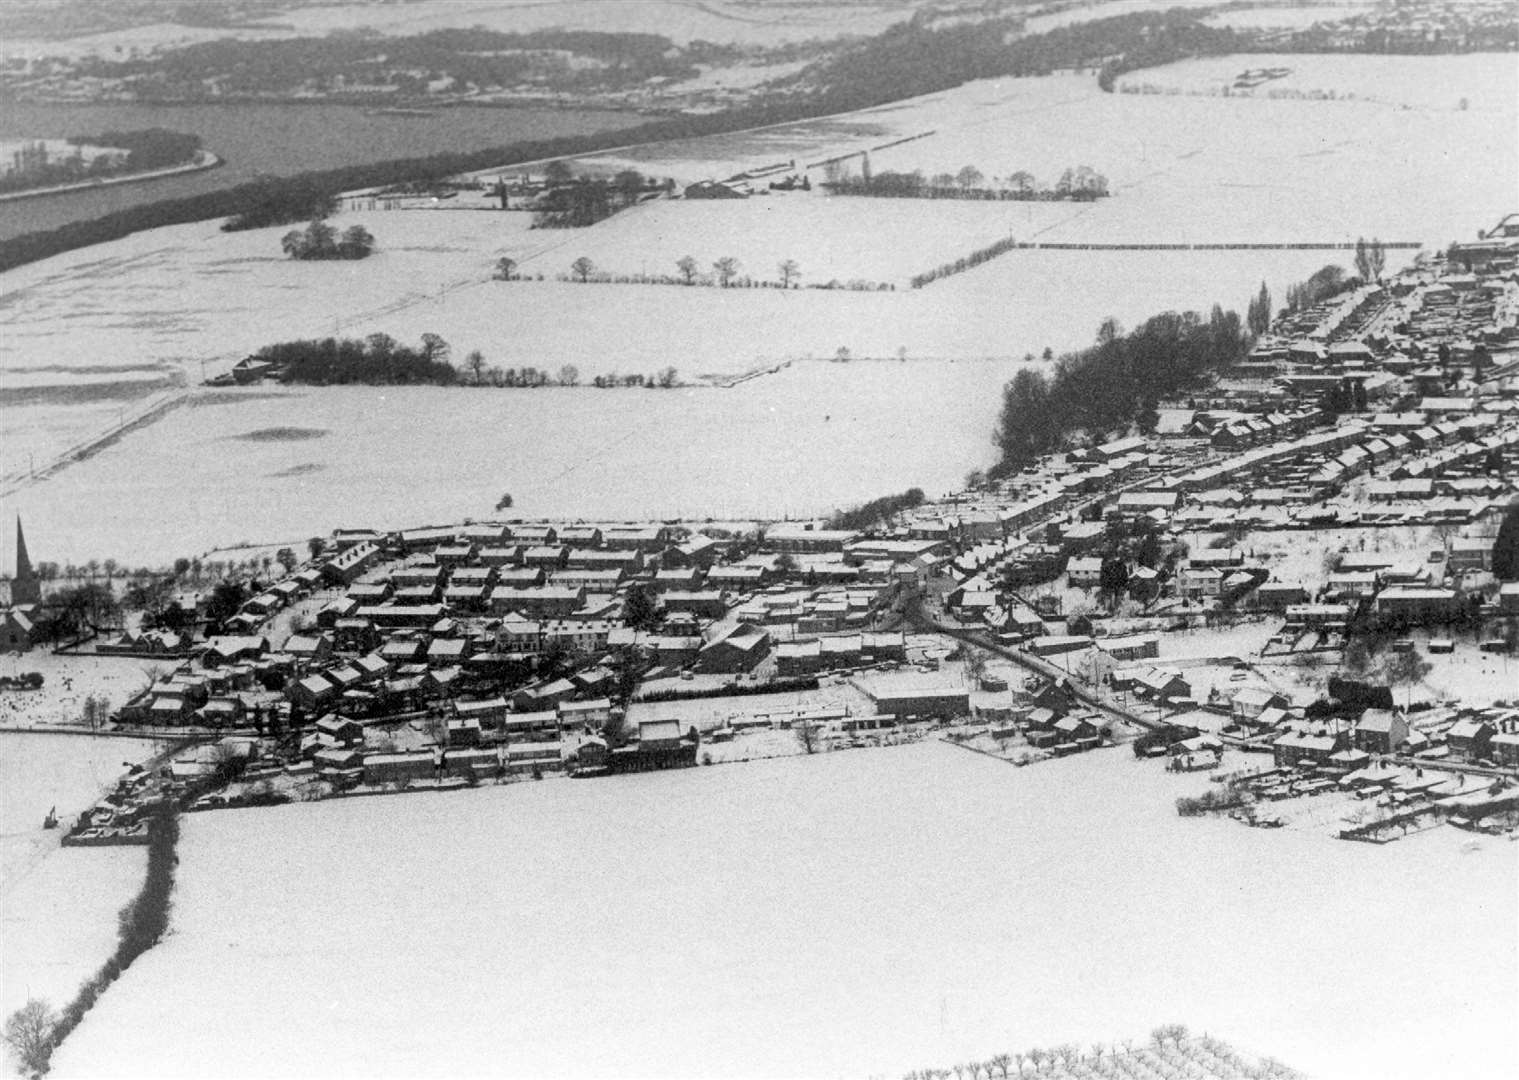 The village of Allhallows under thick snow